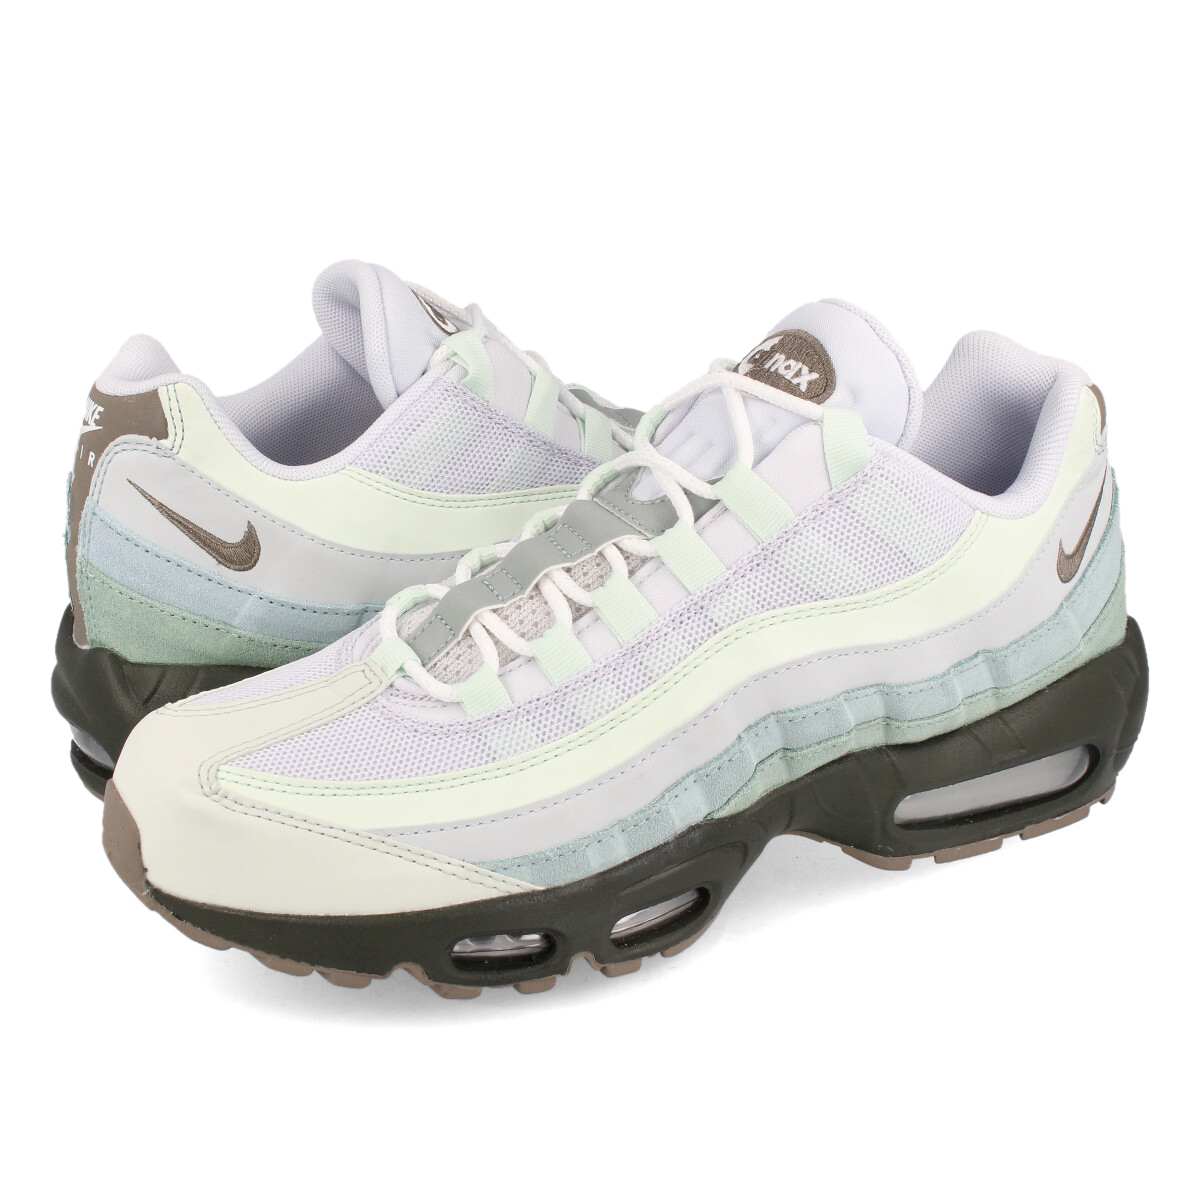 NIKE AIR MAX 95 ナイキ エア マックス 95 APLA SEQUOIA/OLIVE GREY/DUSTY SAGE/OCEAN  CUBE dq9468-355 | SELECT SHOP LOWTEX